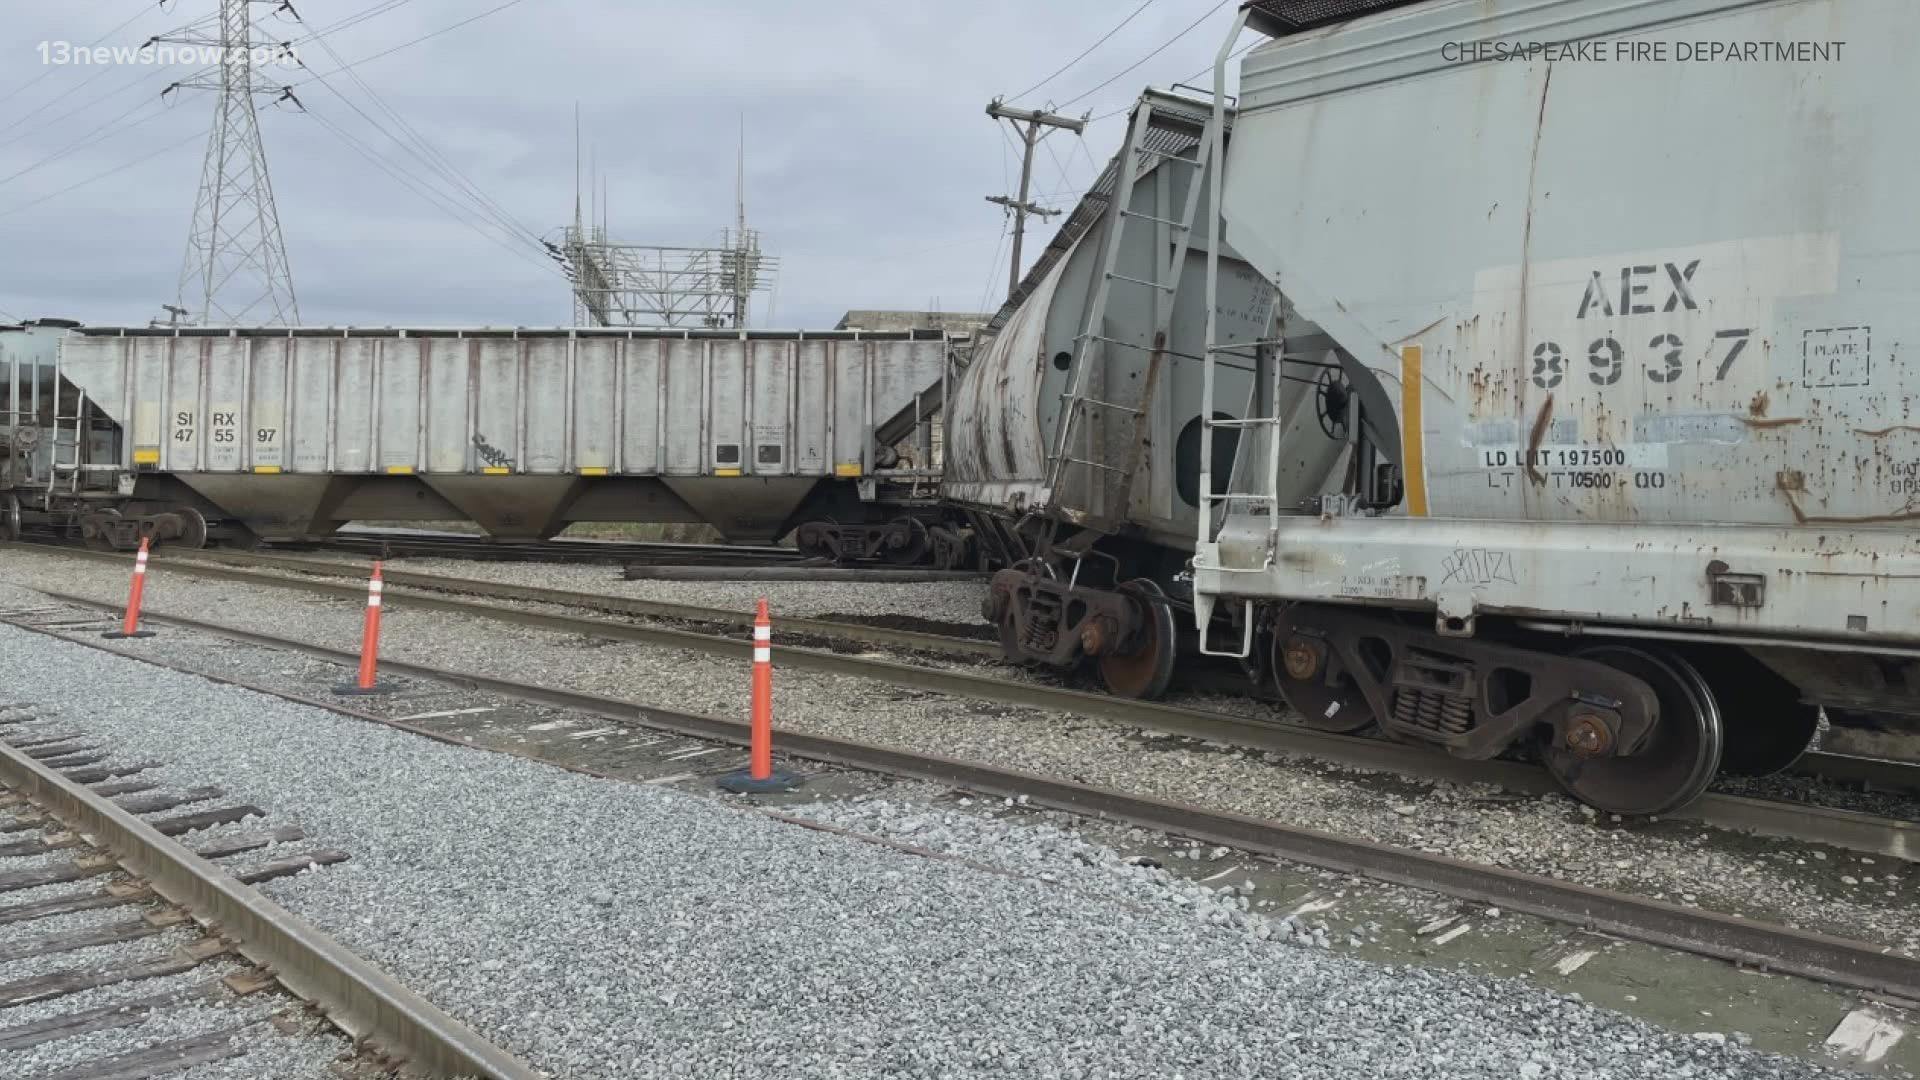 The derailment happened in the area of Priority Lane and Truxton Street.